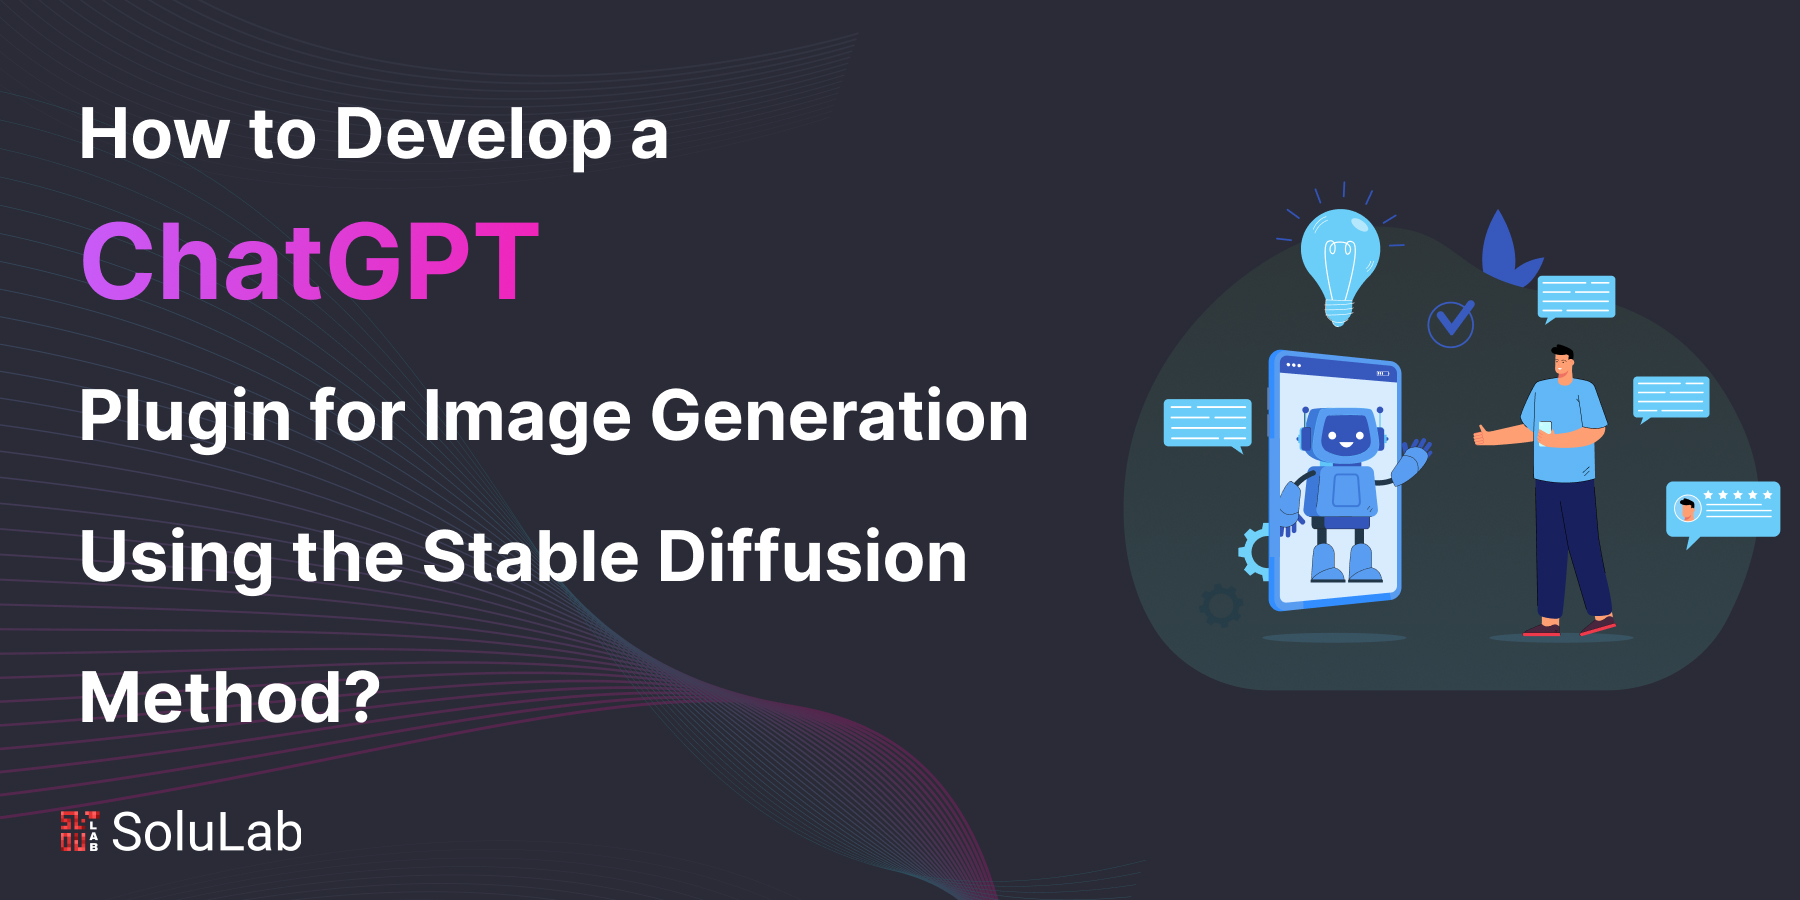 How to Develop a ChatGPT Plugin for Image Generation Using the Stable Diffusion Method?